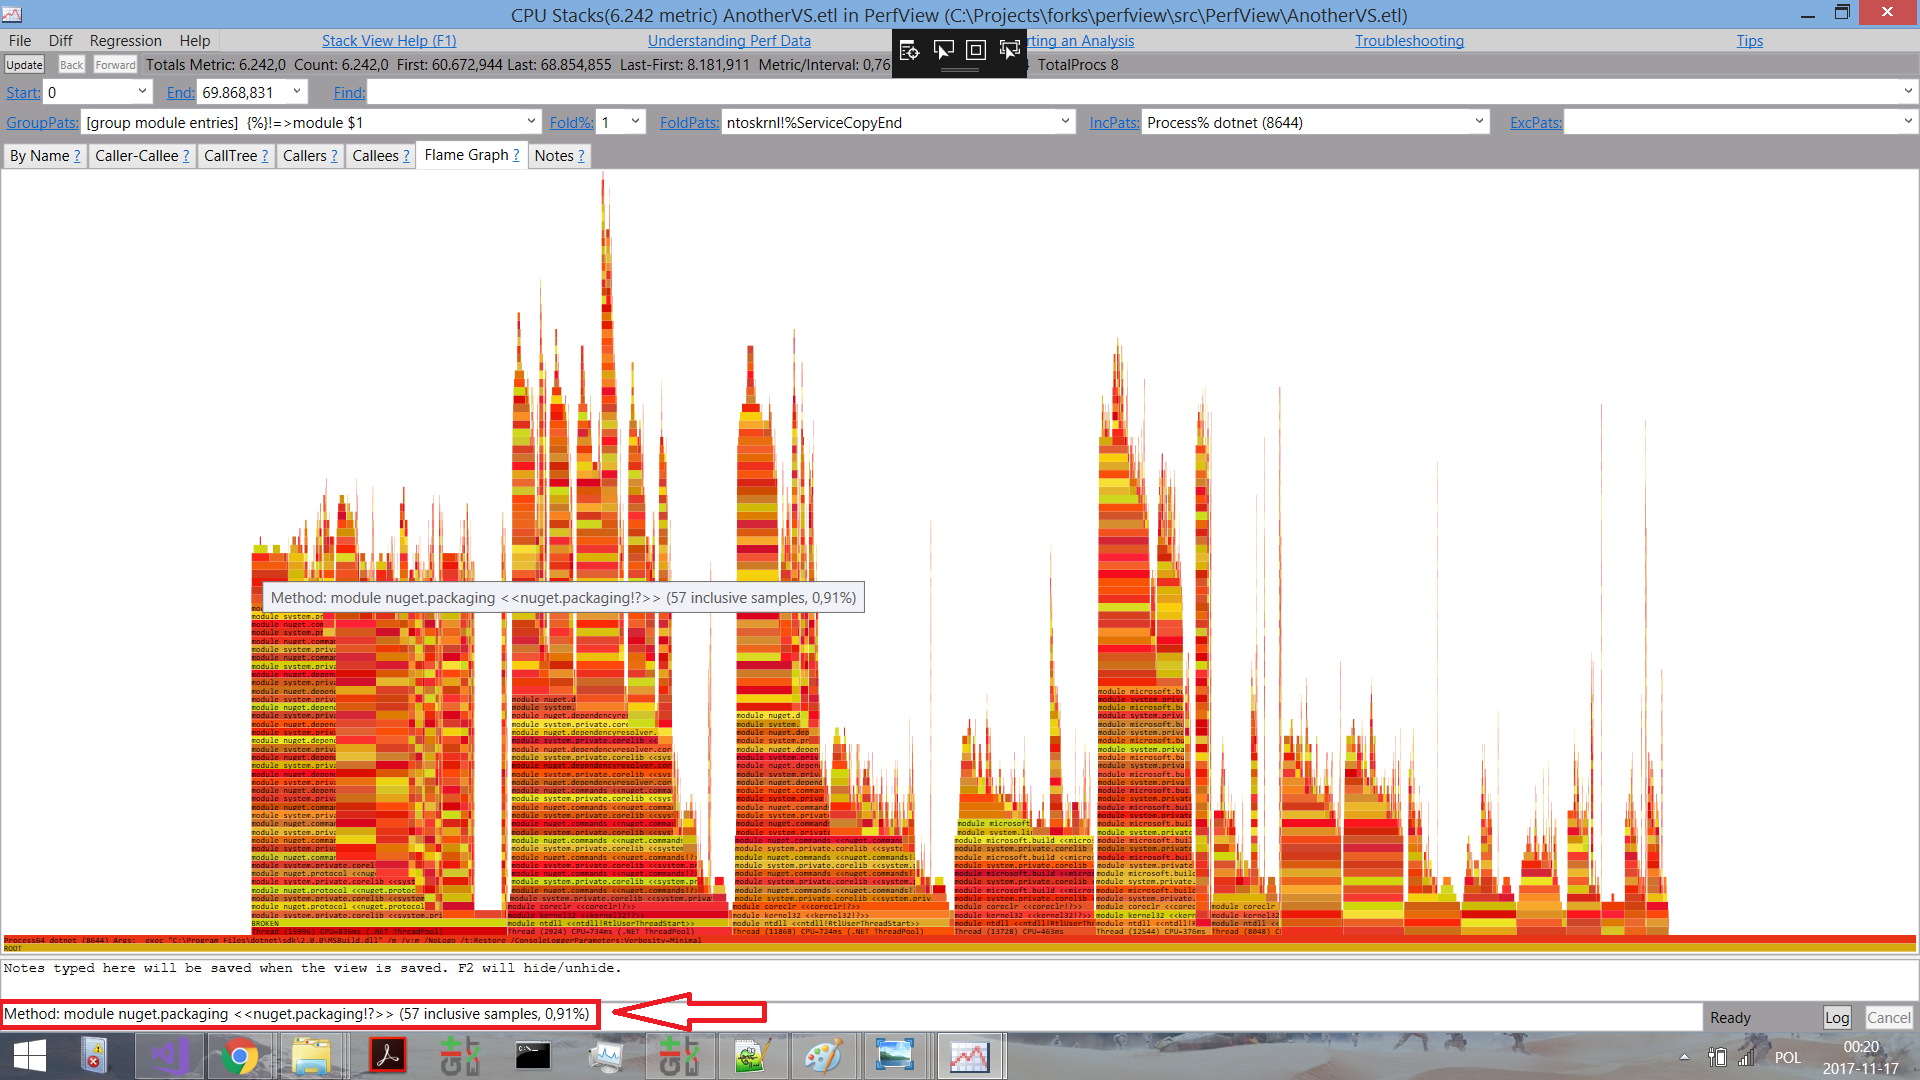 PerfView Flamegraphs